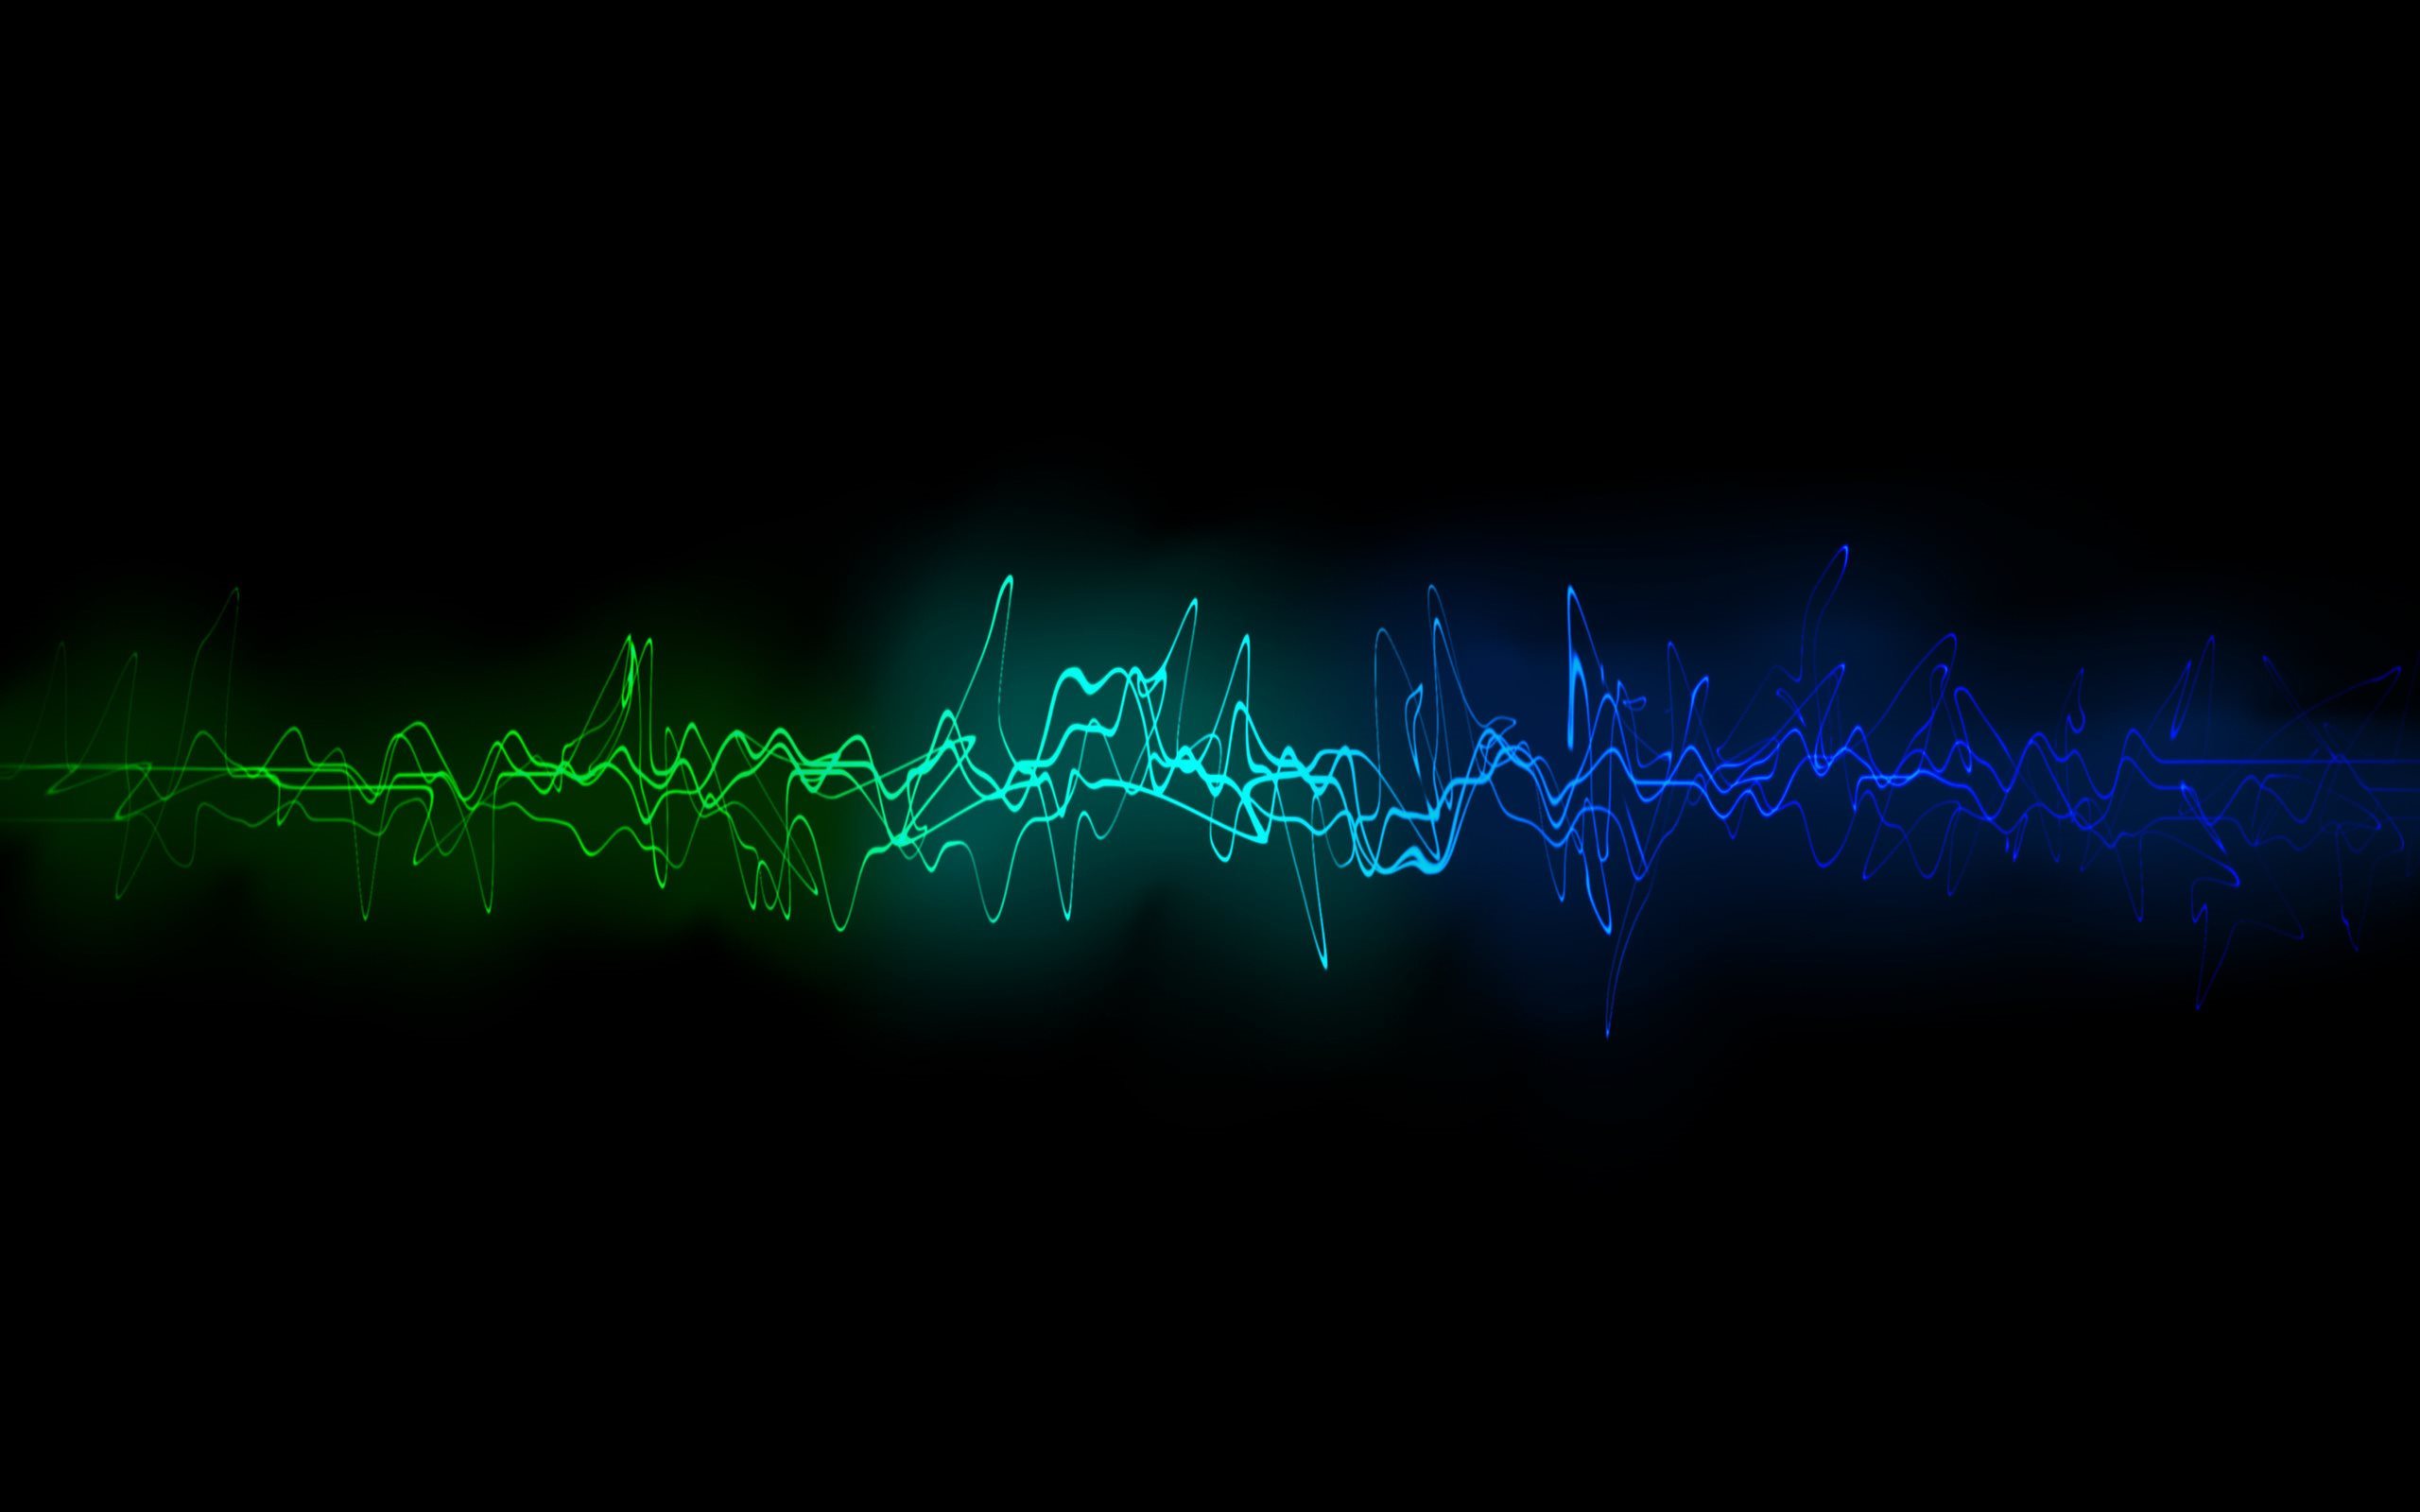 Download wallpaper radio waves, neon, black background for desktop with resolution 2560x1600. High Quality HD picture wallpaper